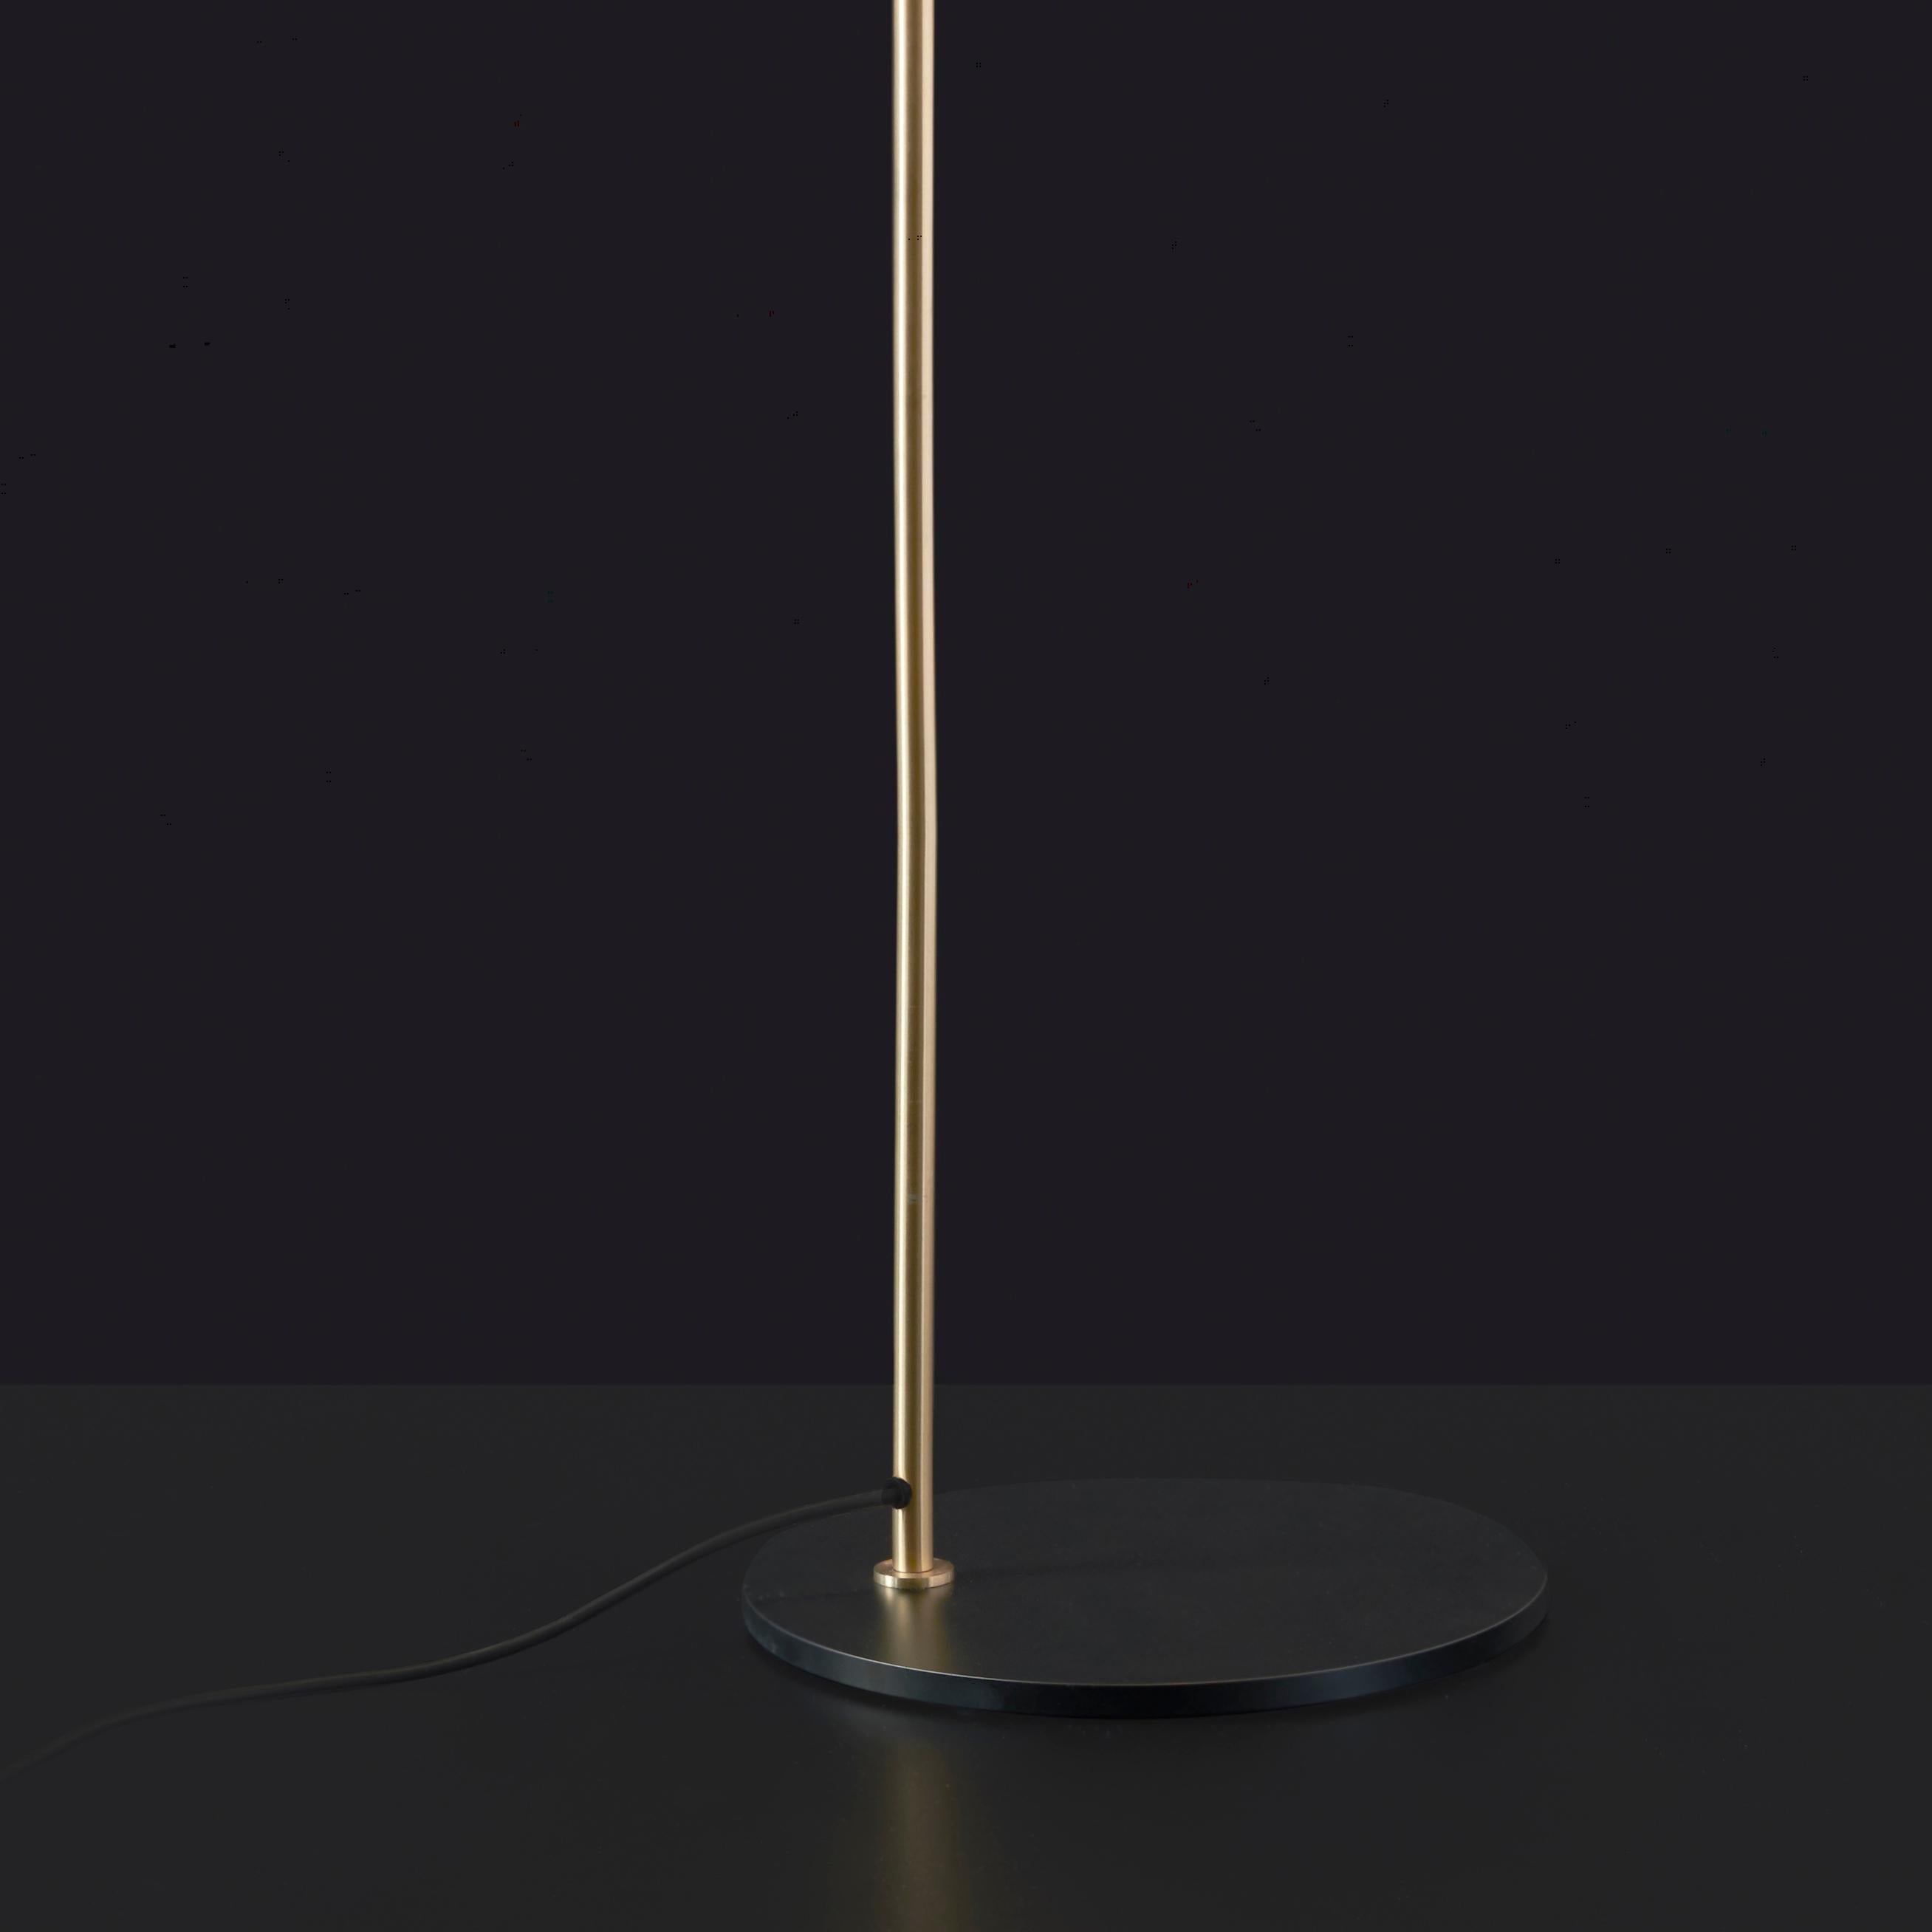 Italian Ostuni and Forti 1953 Floor Lamp by Oluce For Sale